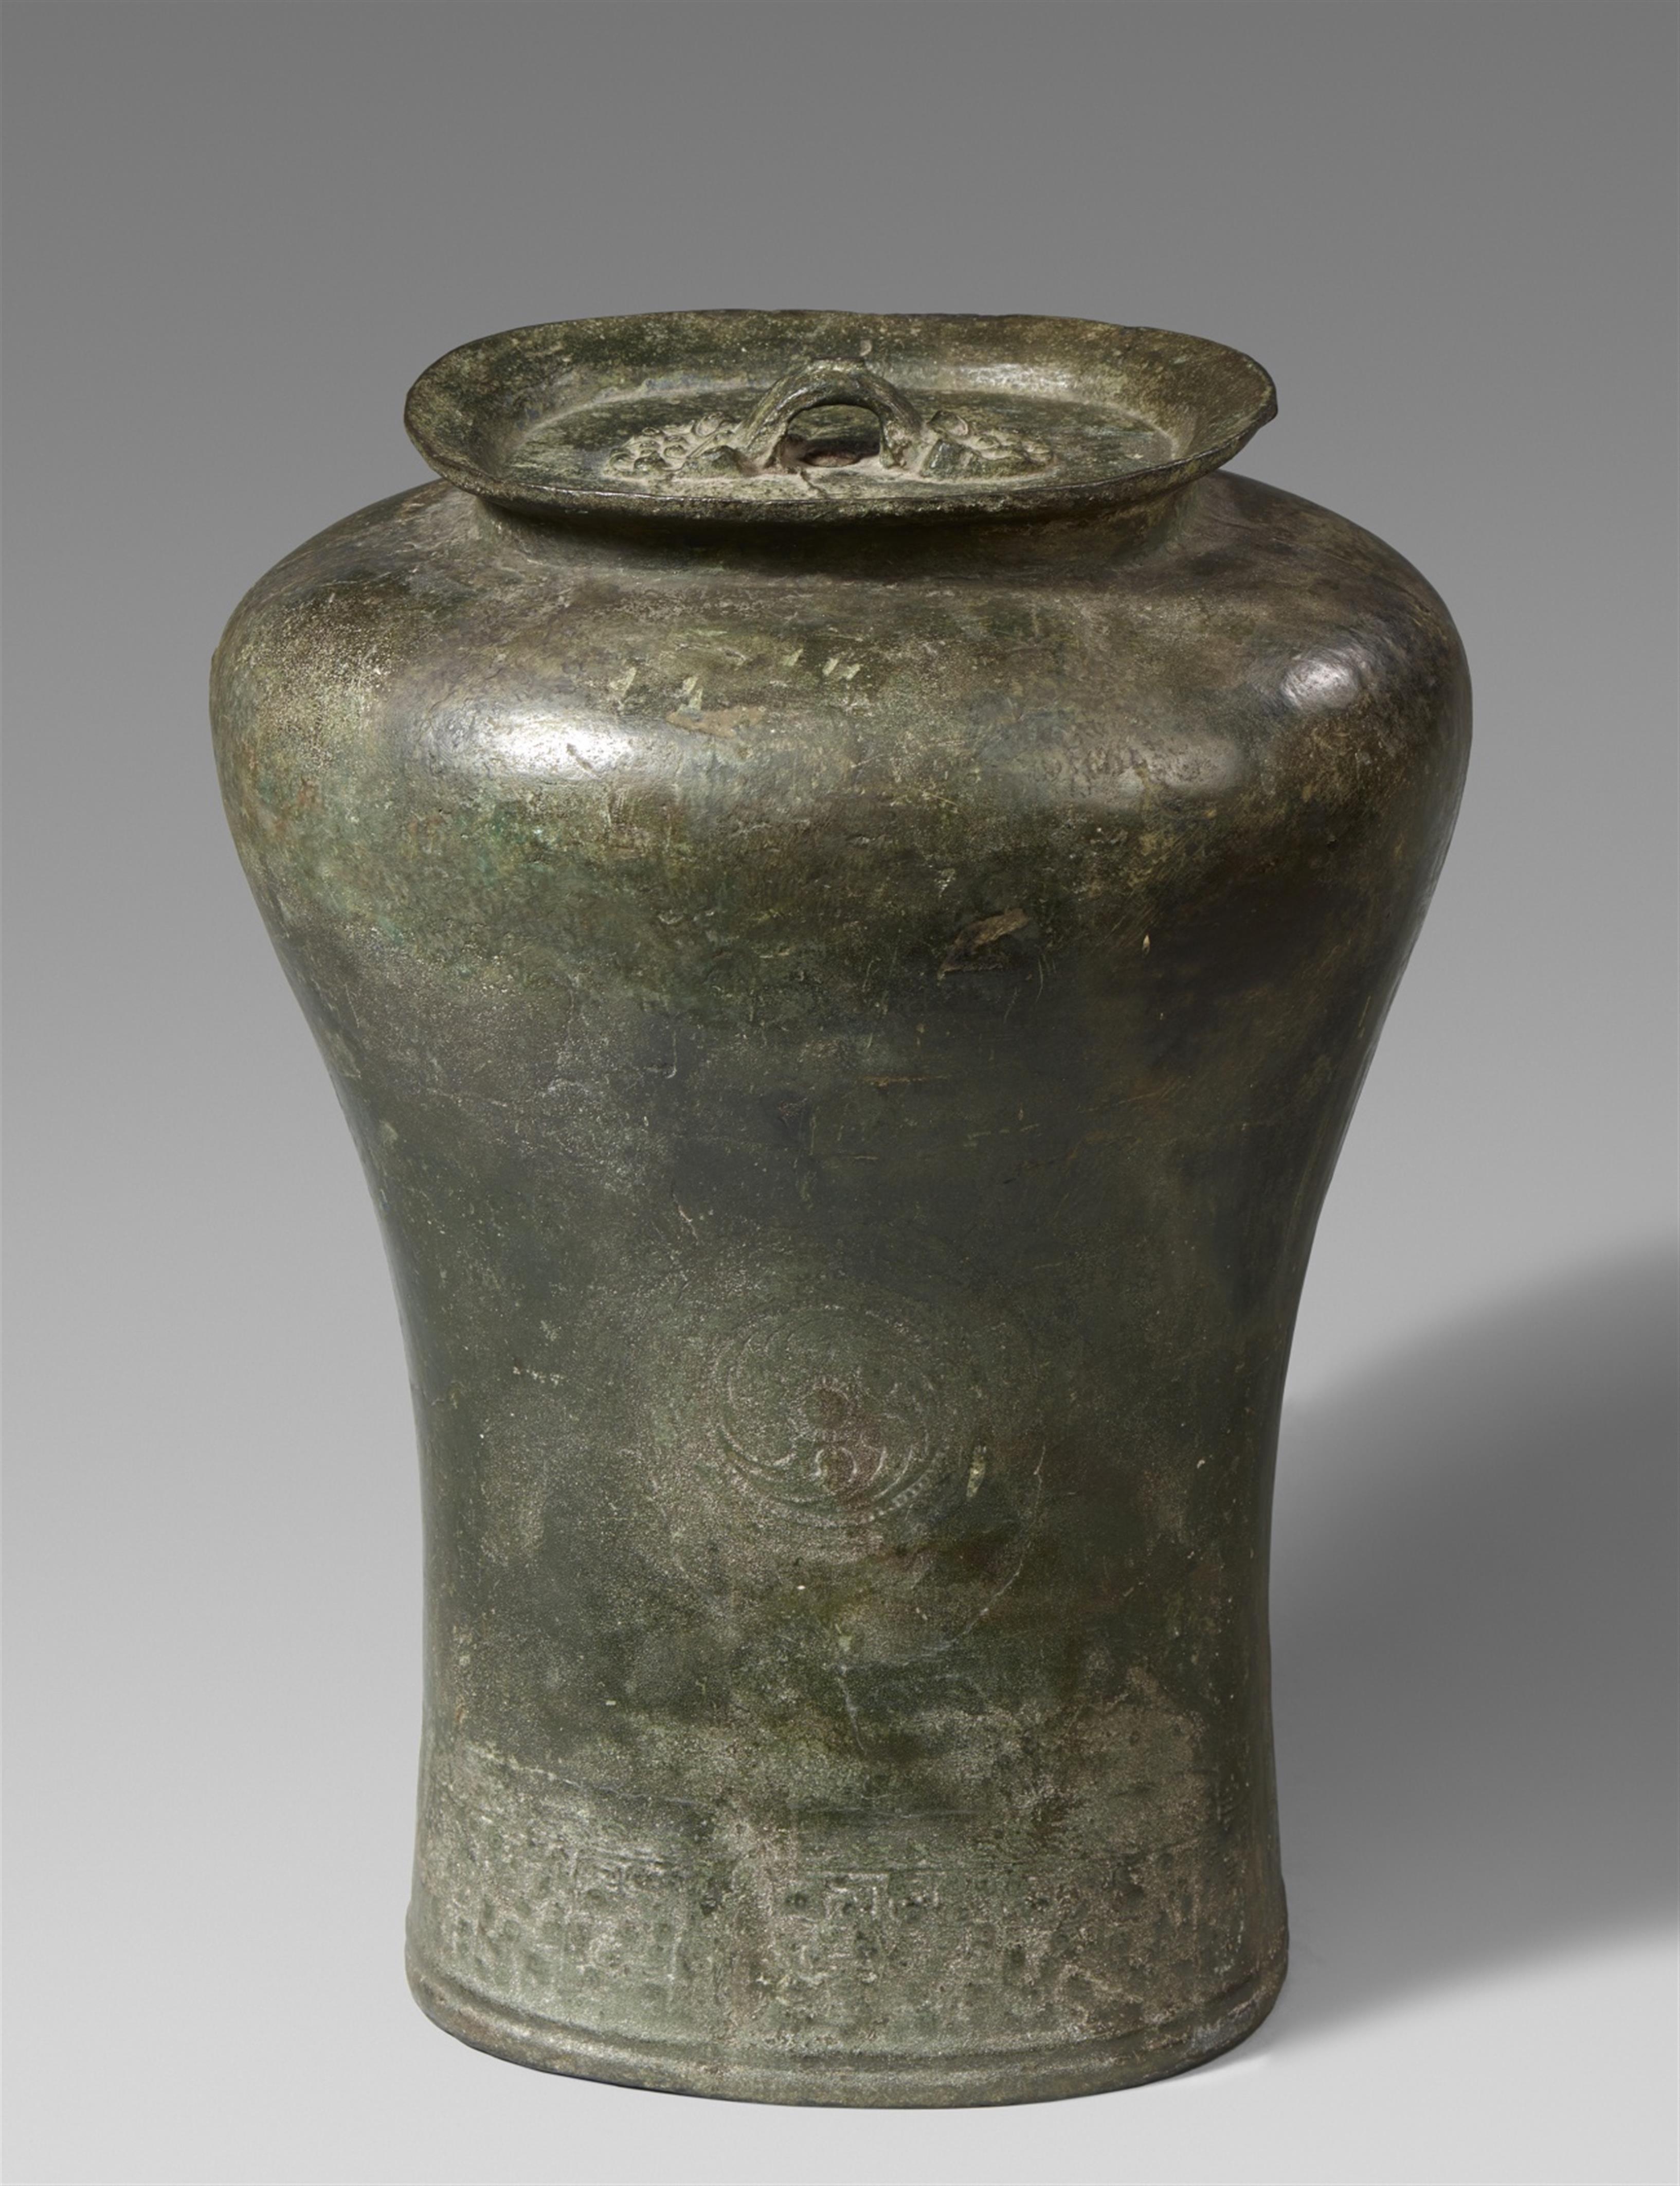 A large bronze military drum/bell. South-central/South-west China. Late Eastern Zhou/early Western Han dynasty, 3rd century BC - image-1